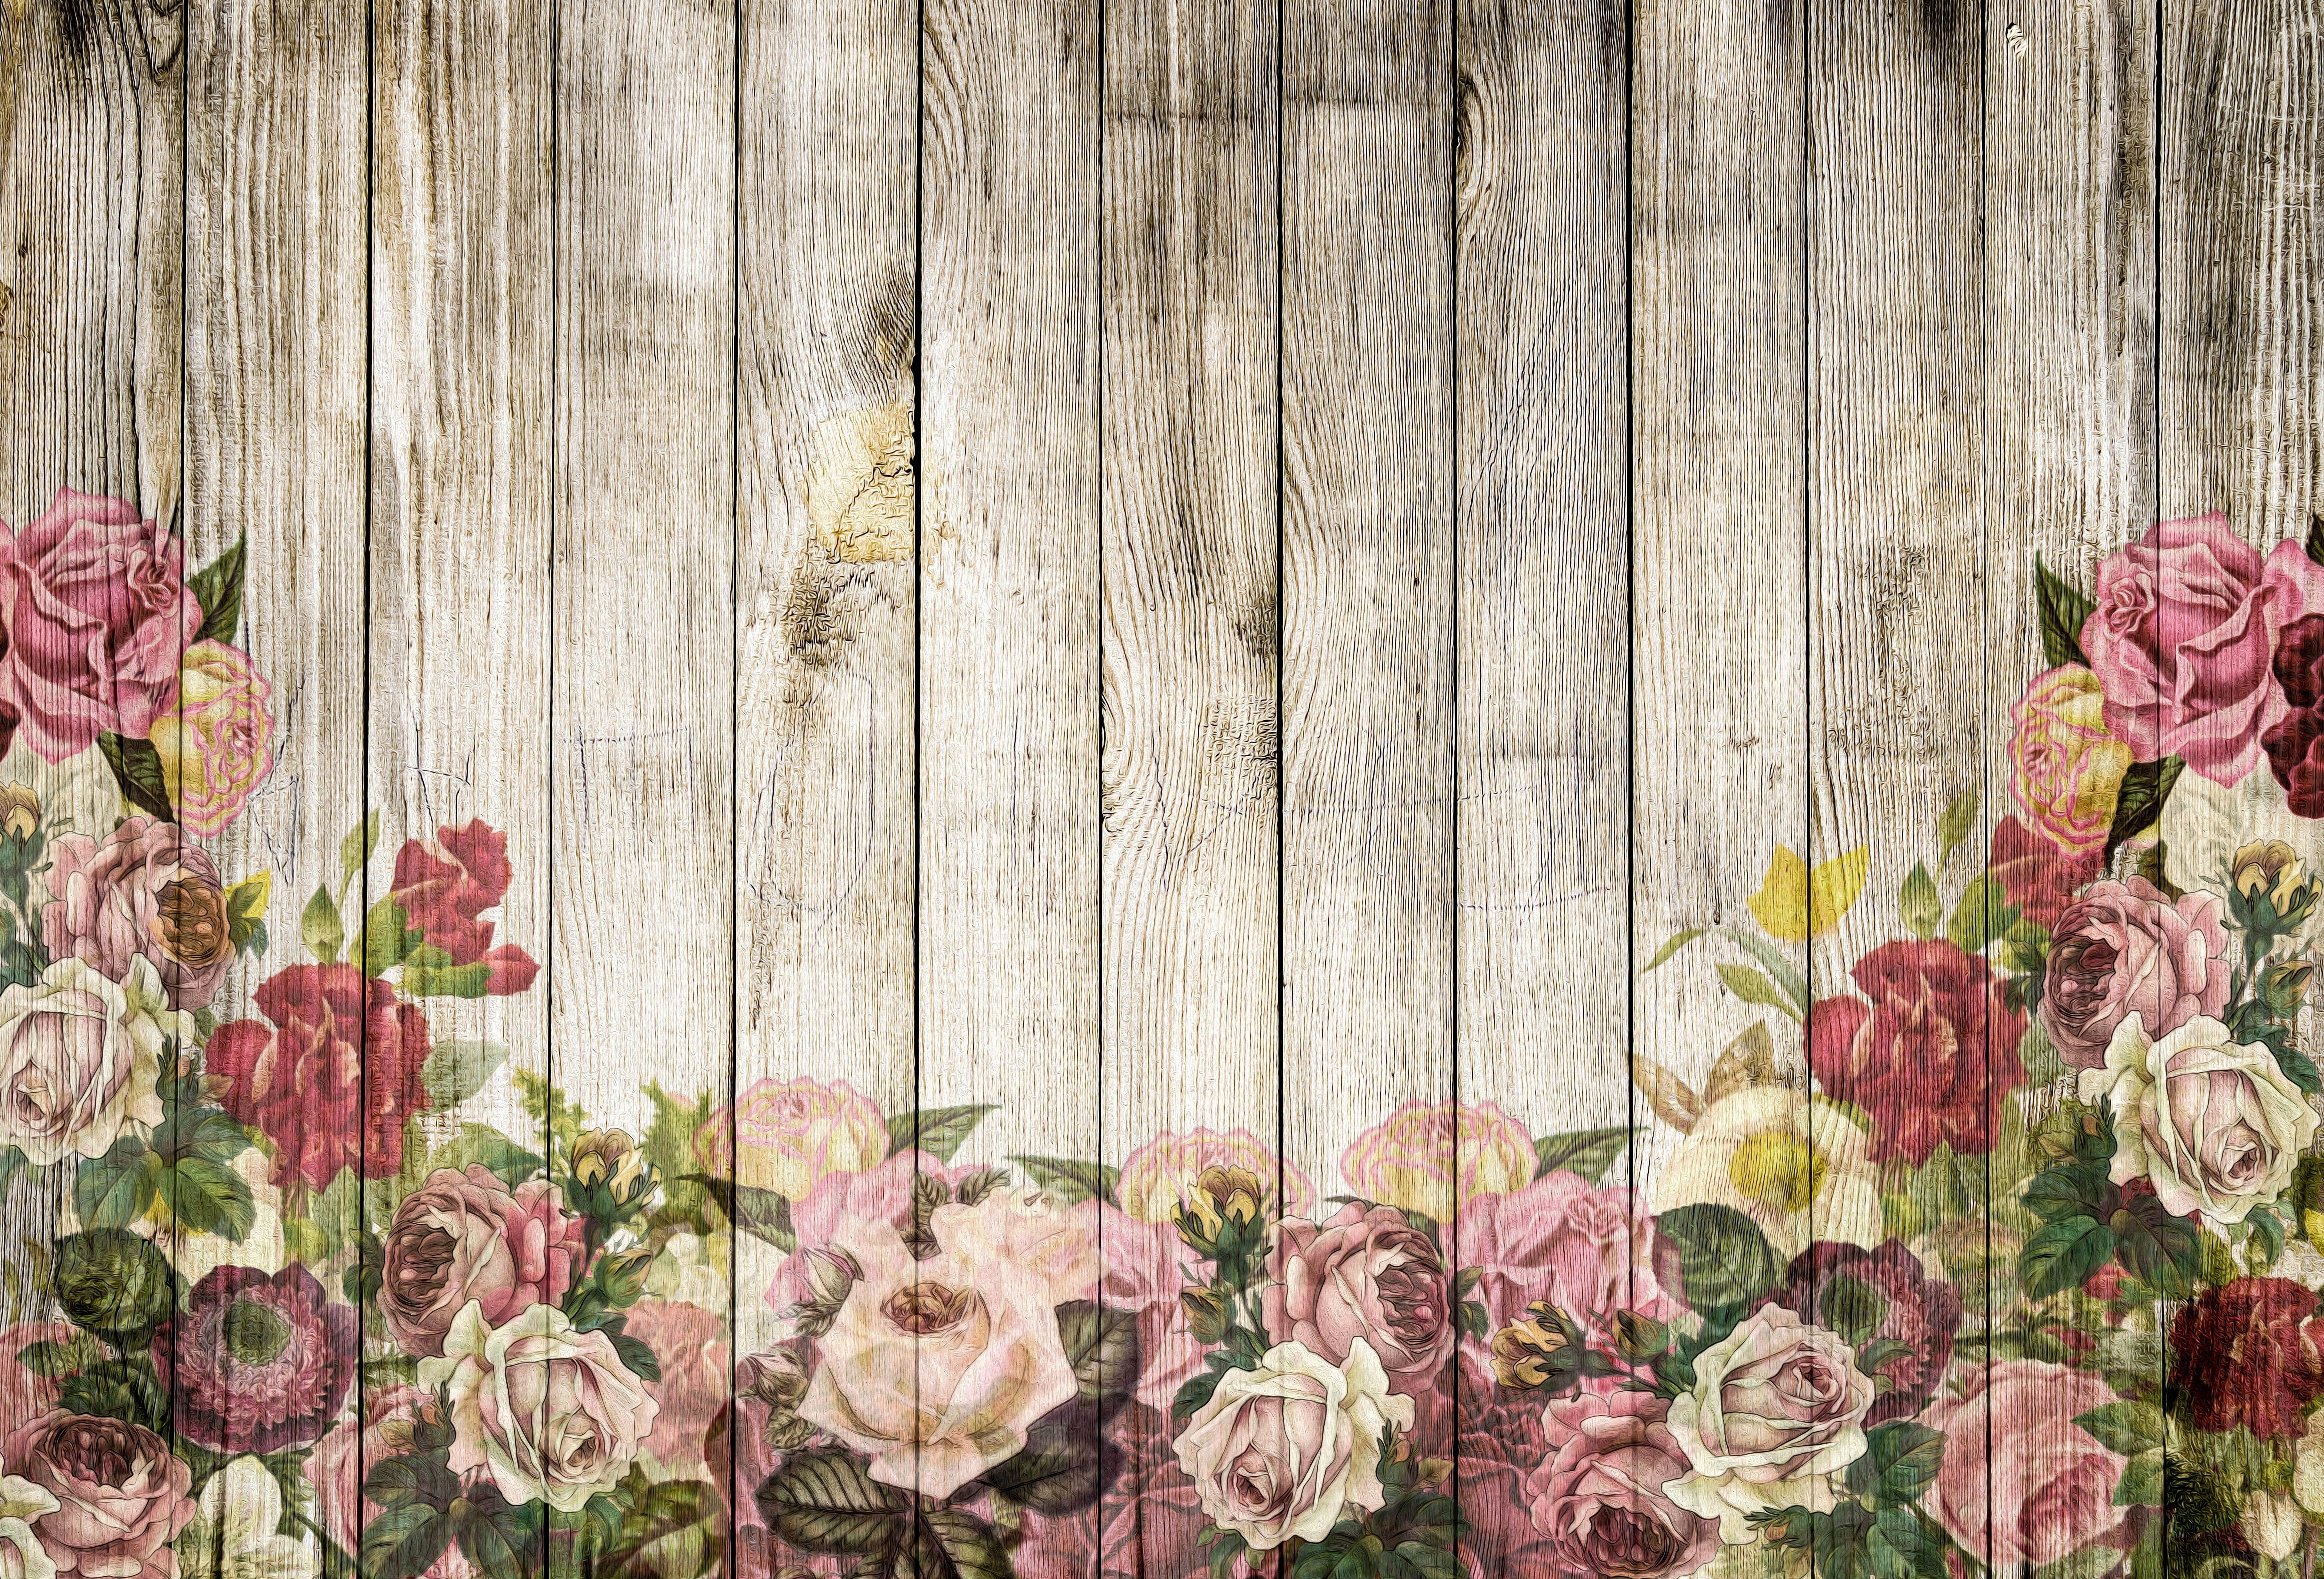 Shabby Chic Desktop Wallpapers - Top Free Shabby Chic Desktop Backgrounds - WallpaperAccess